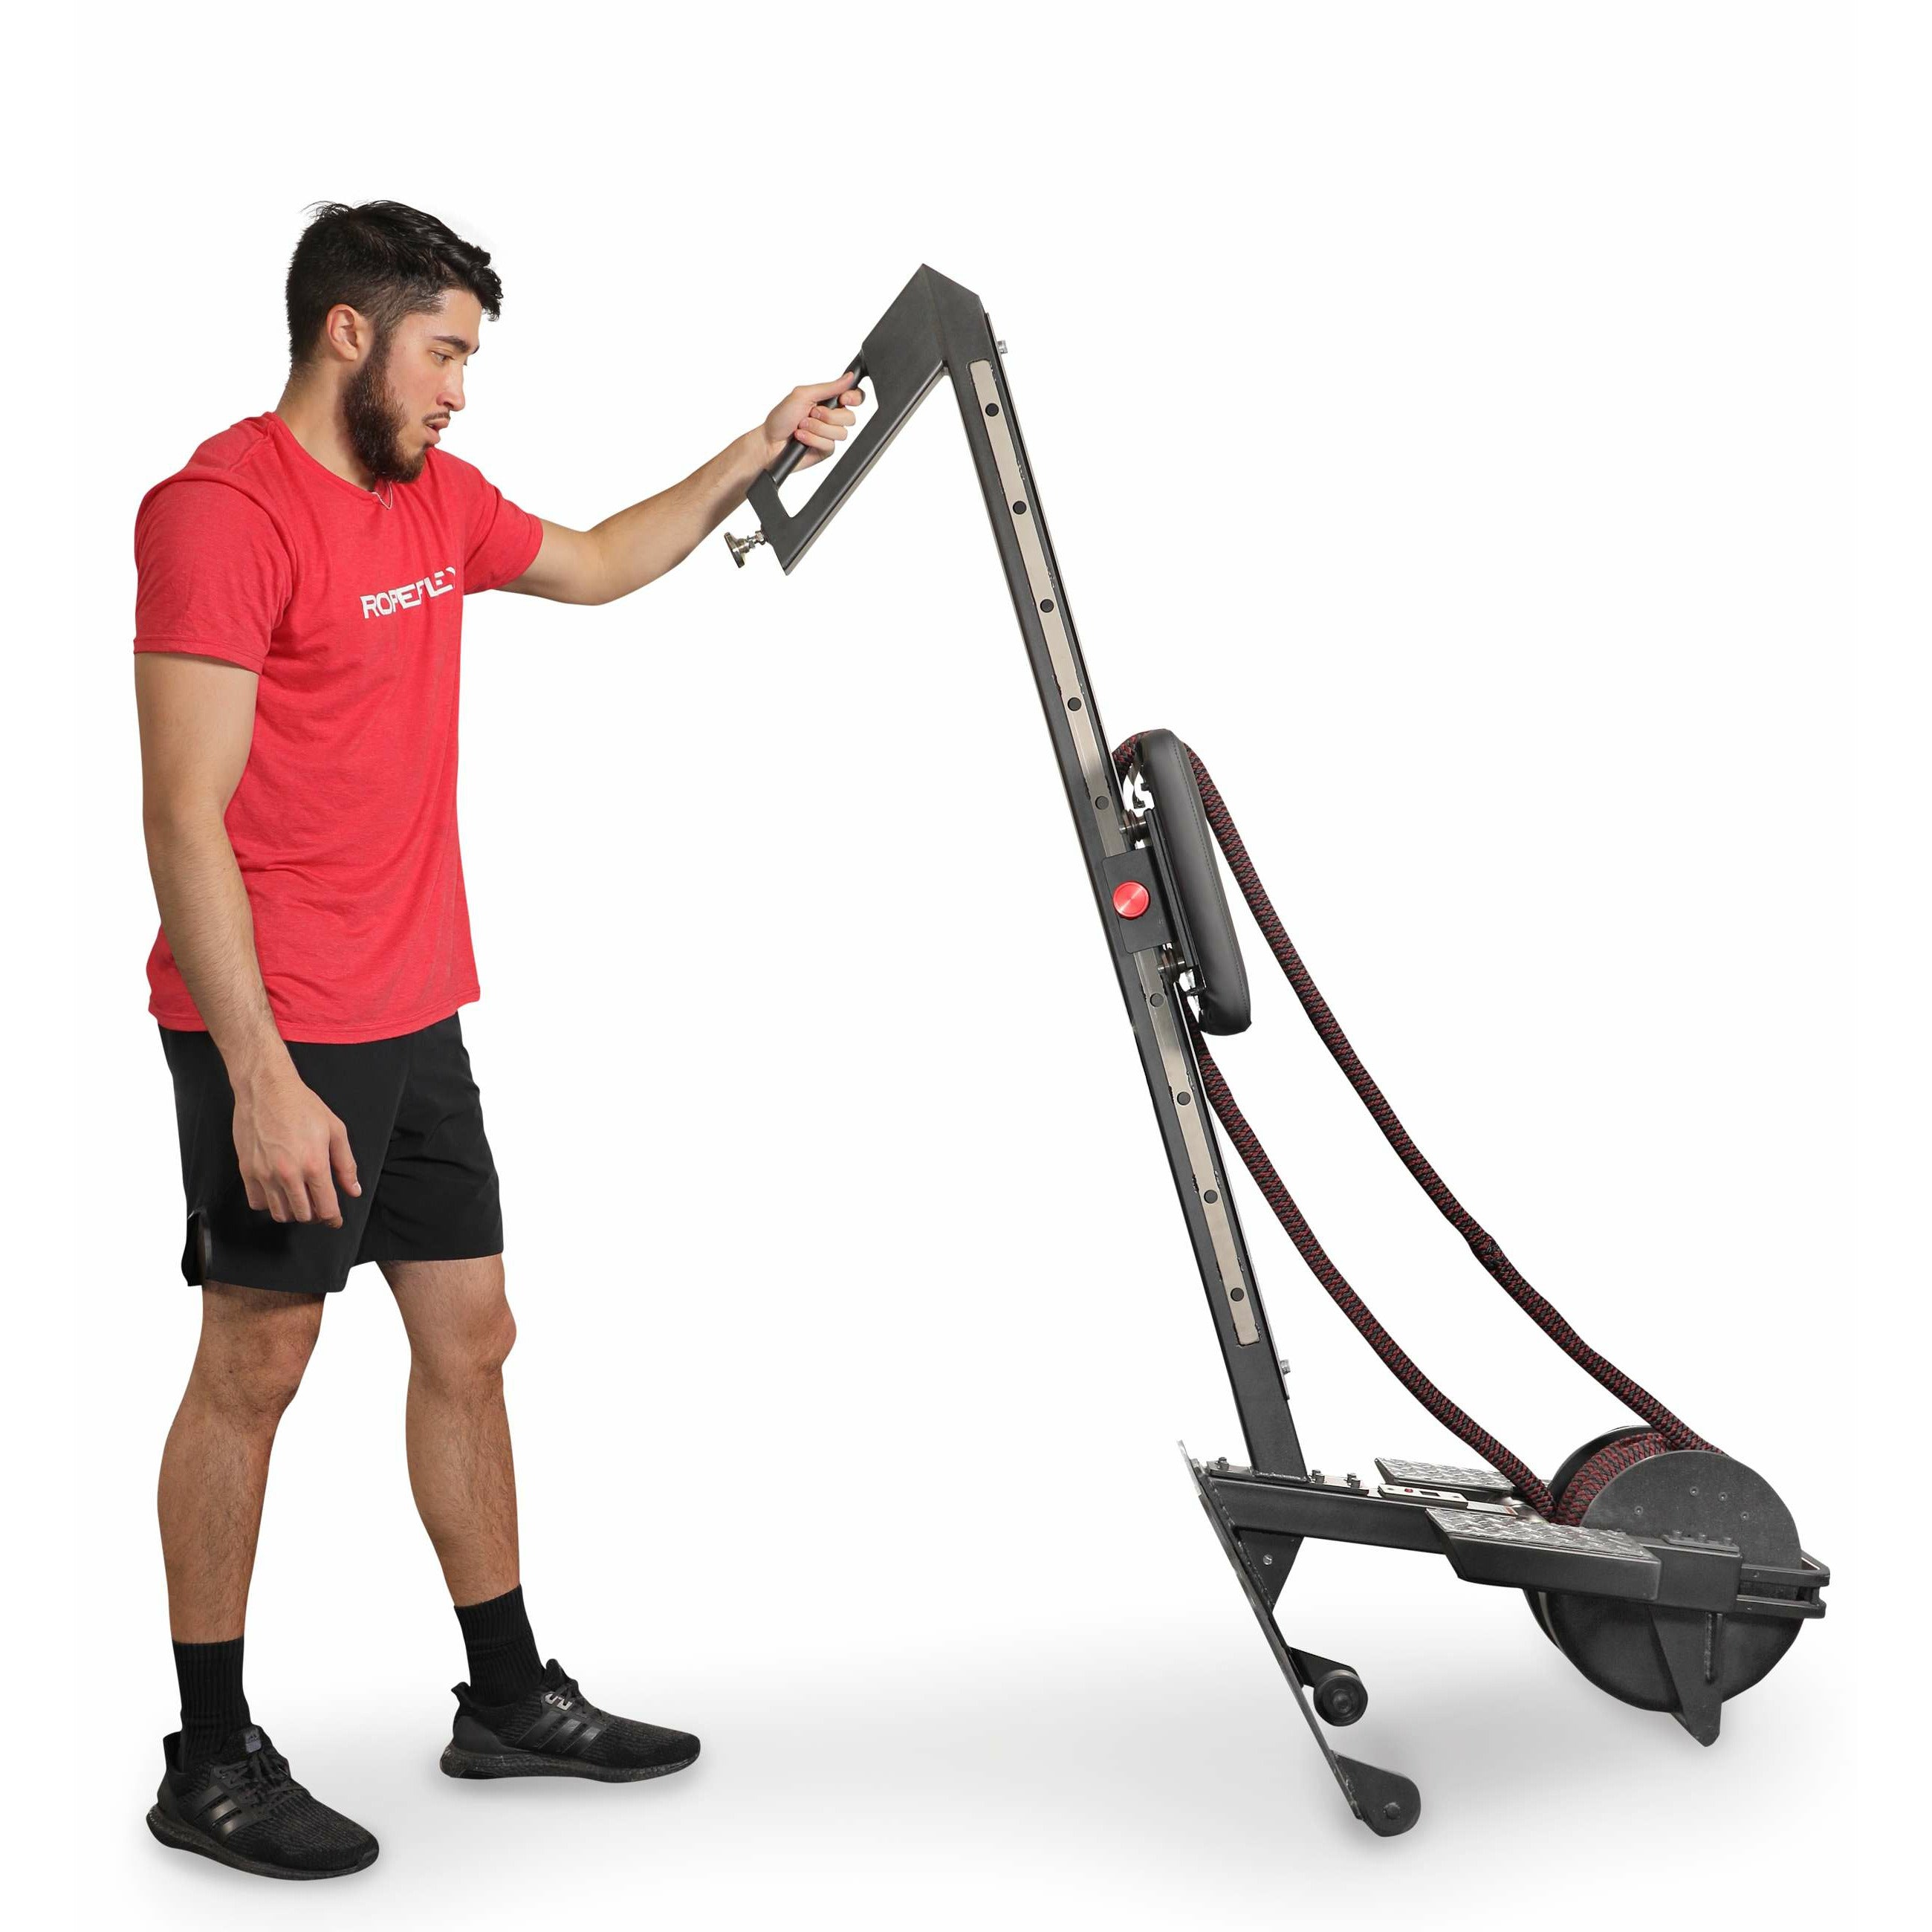 ROPEFLEX Rowing Rope Trainer- RX3200